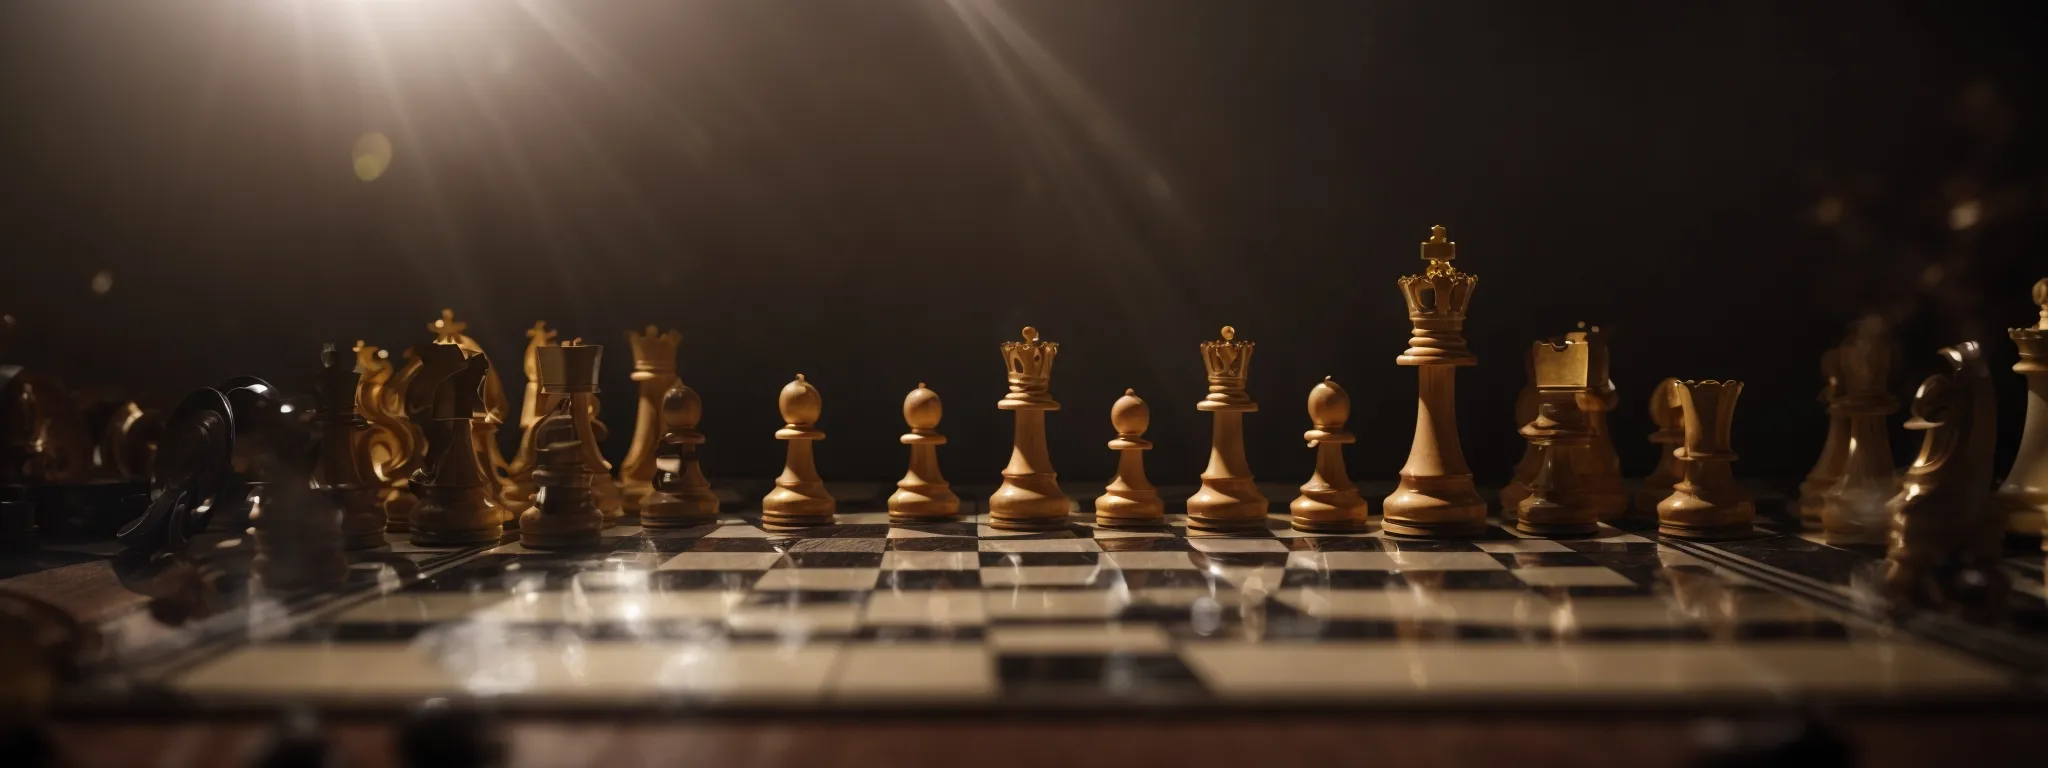 a chessboard with one piece standing amidst fallen competitors under a spotlight, symbolizing strategic triumph.